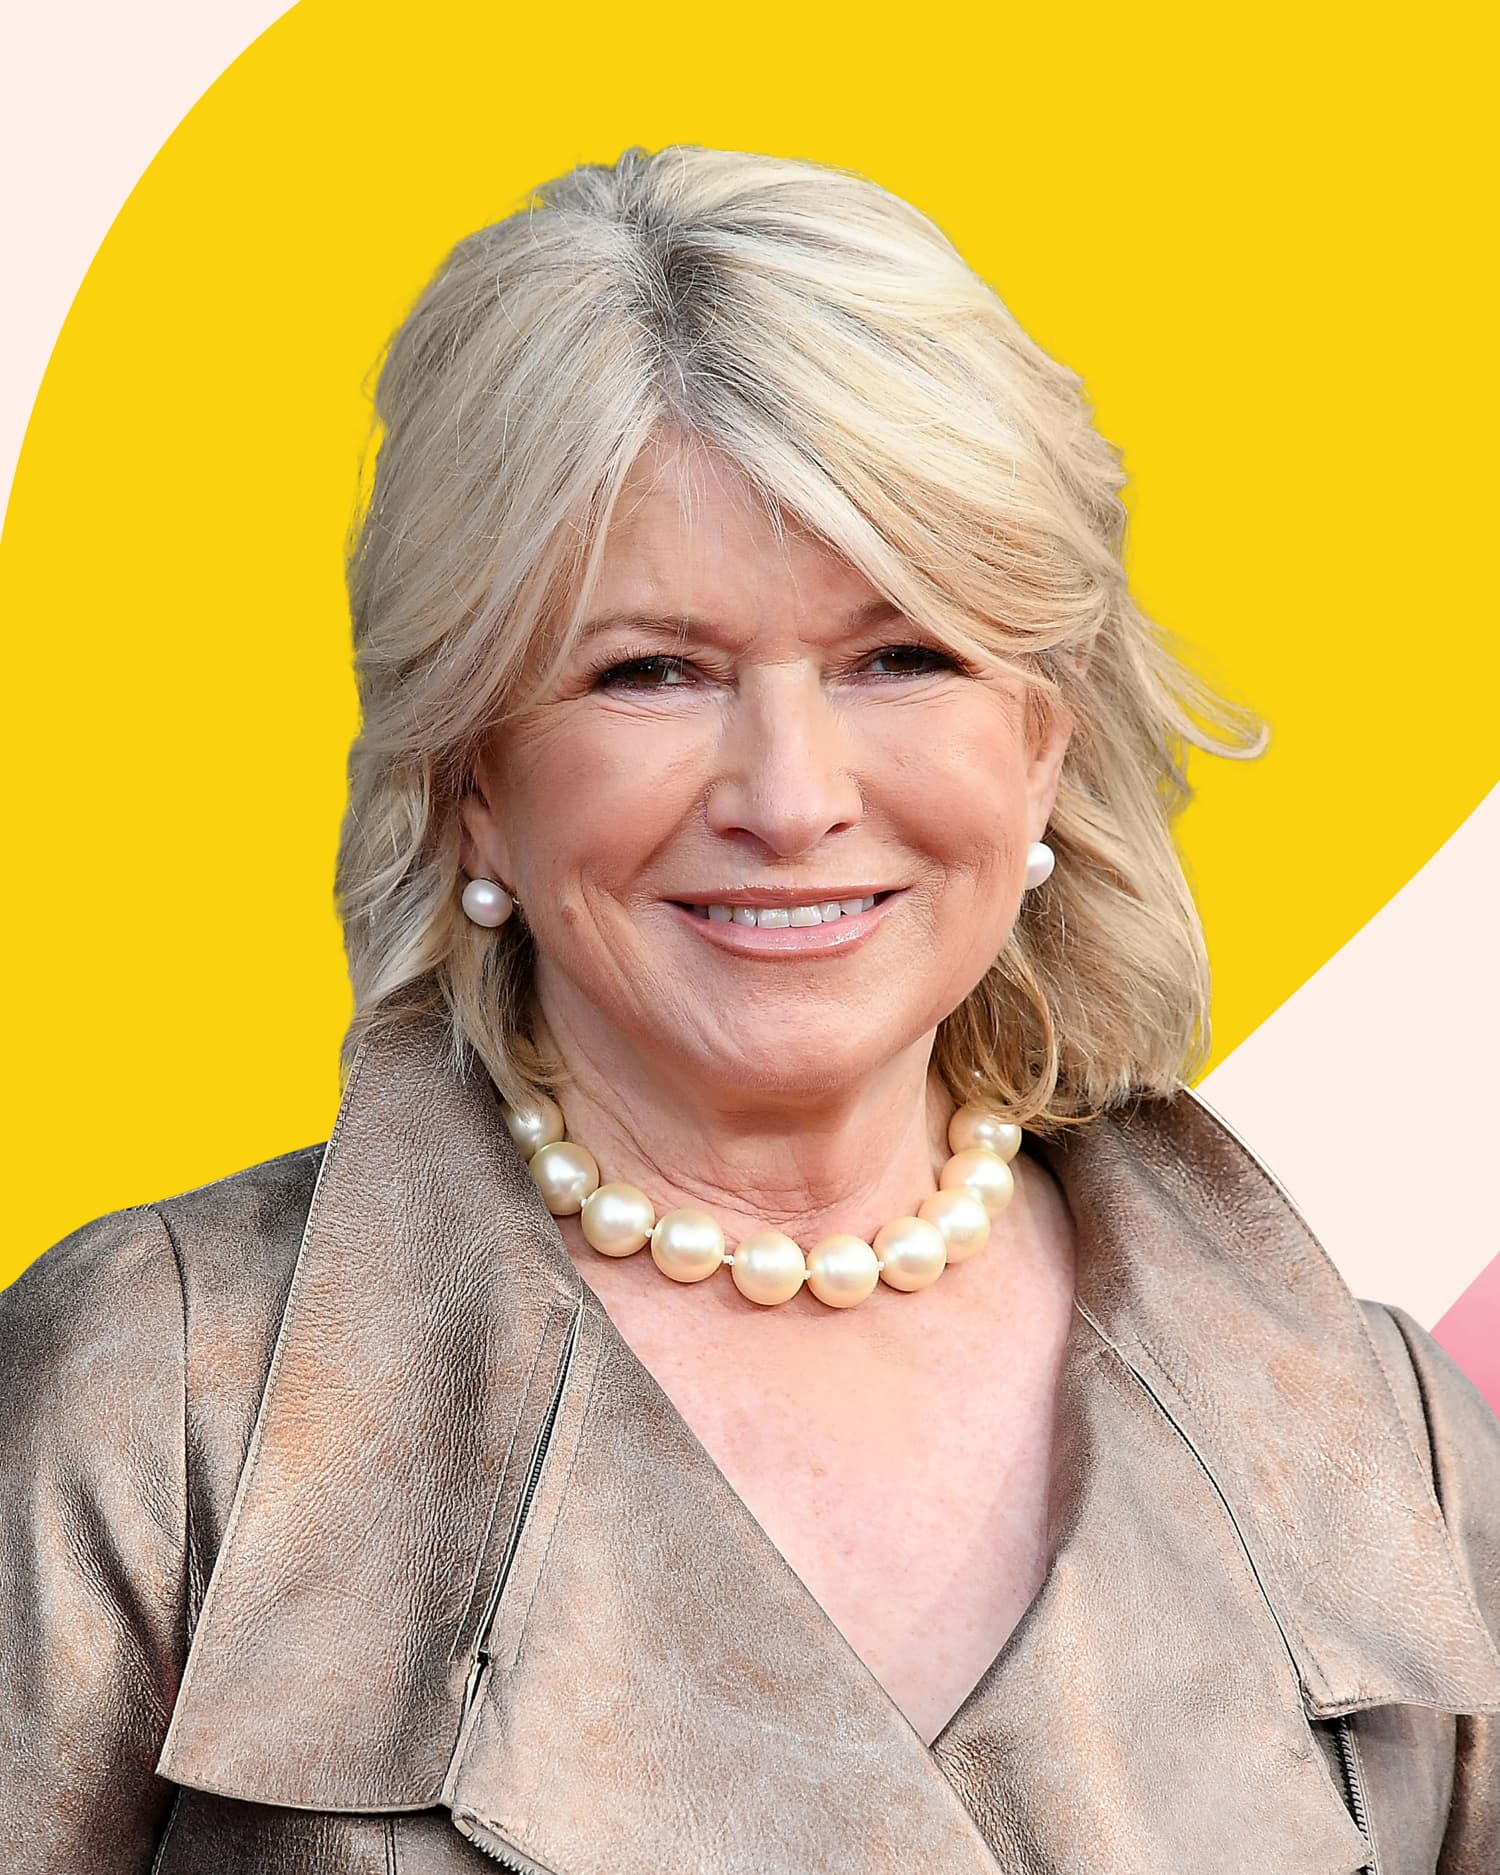 Martha Stewart’s Tasty Spin on Potato Salad Will Become Your Favorite Way to Make It